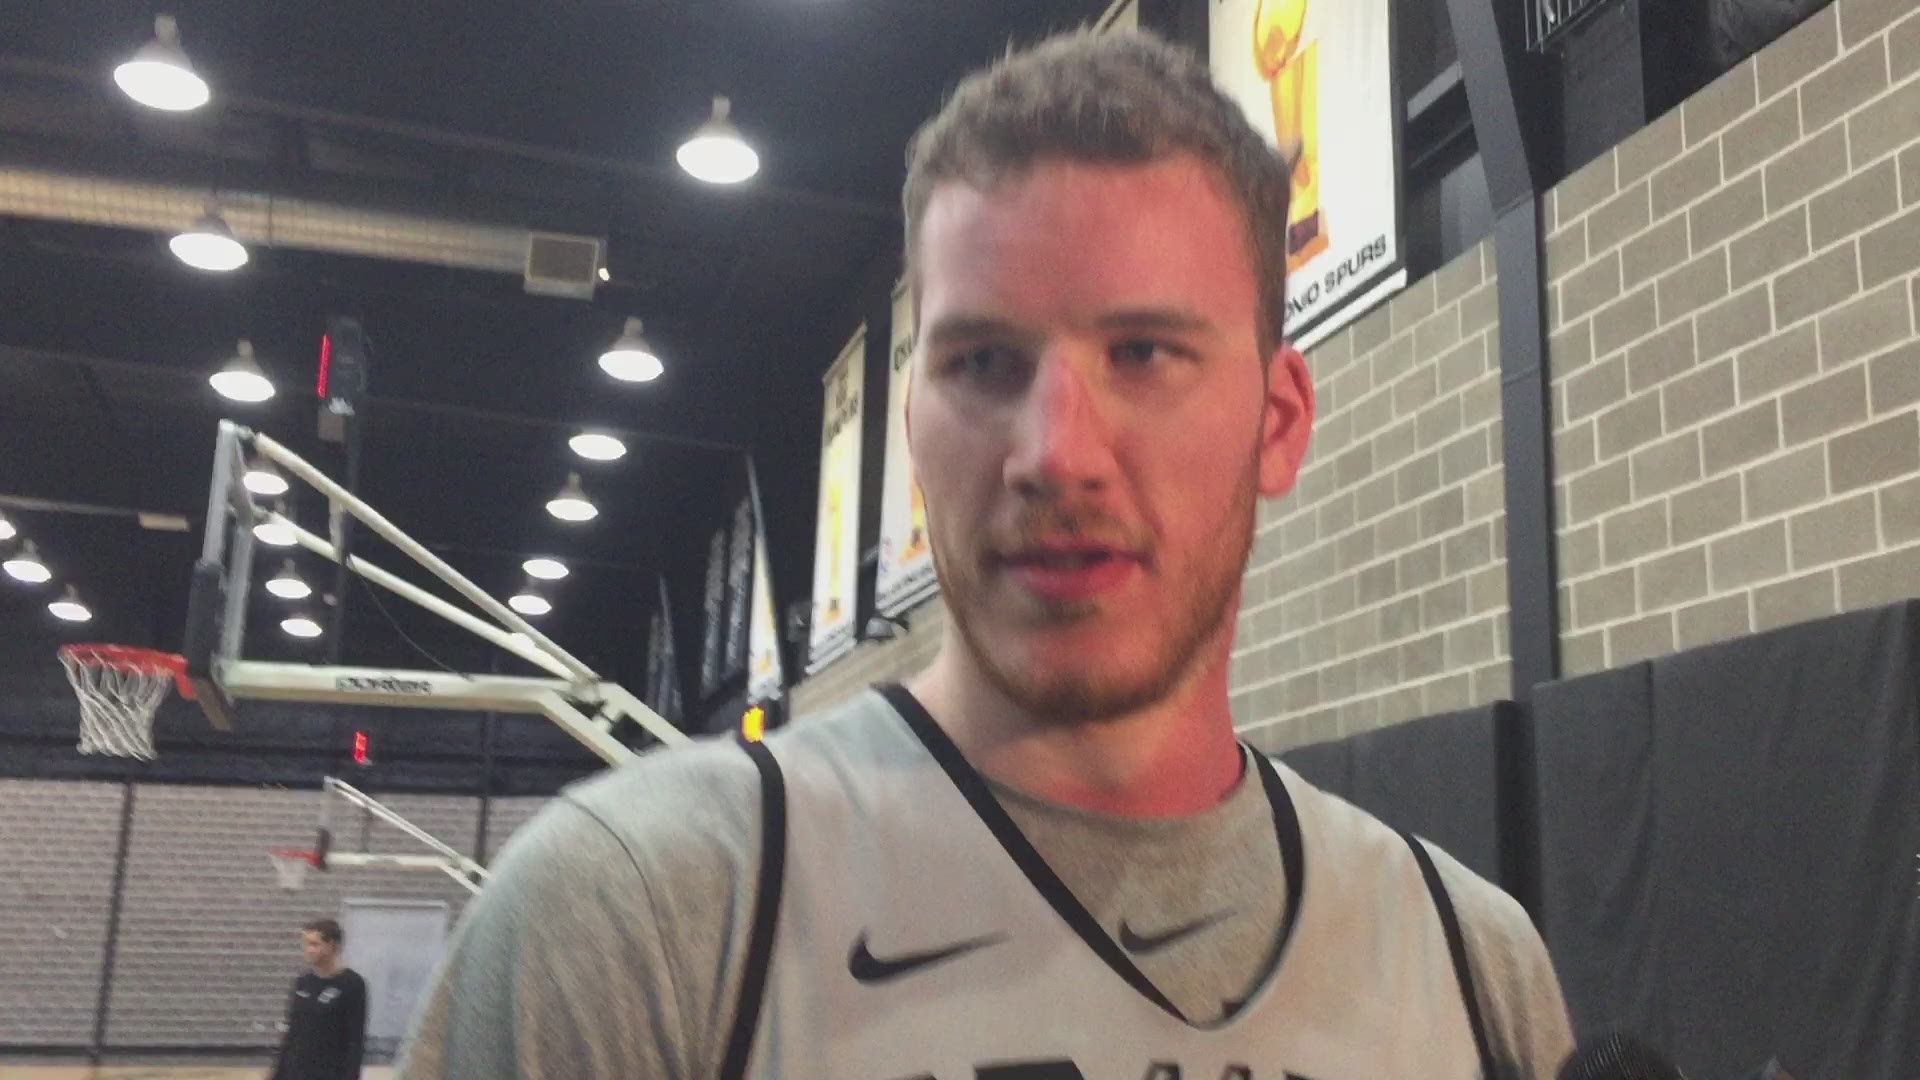 Spurs center Jakob Poeltl talks about Friday night's game against the Knicks